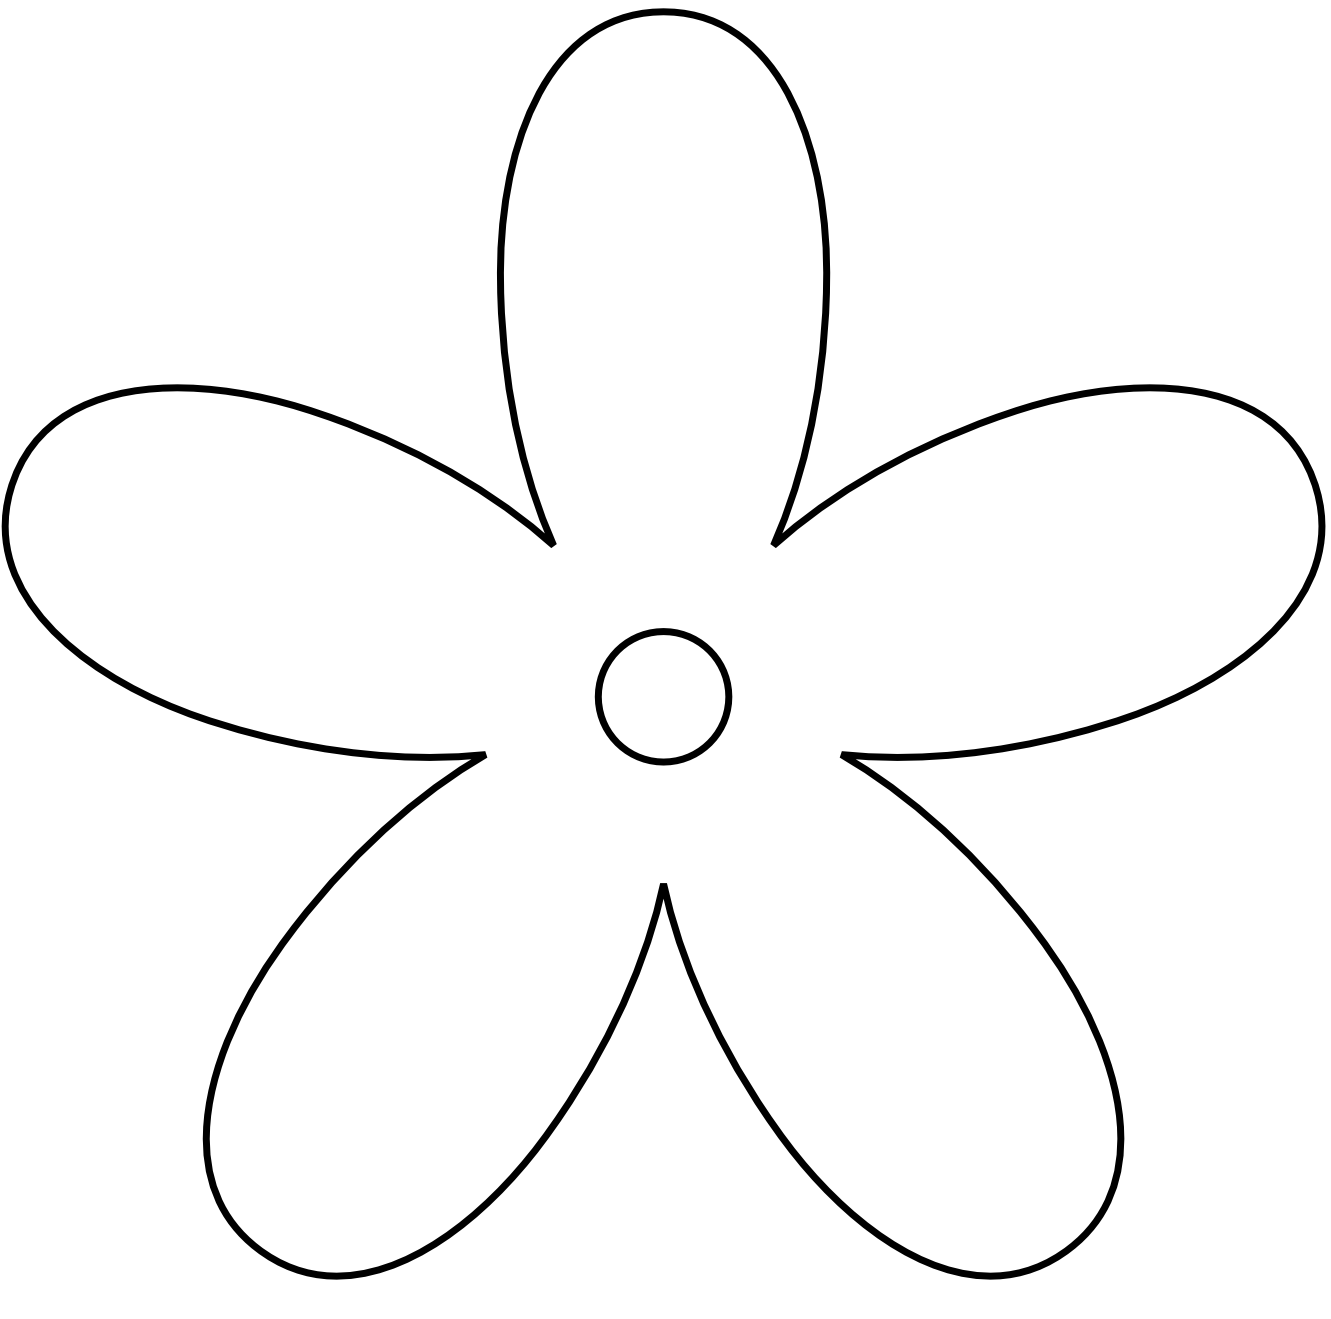 clipart flowers black and white - photo #29